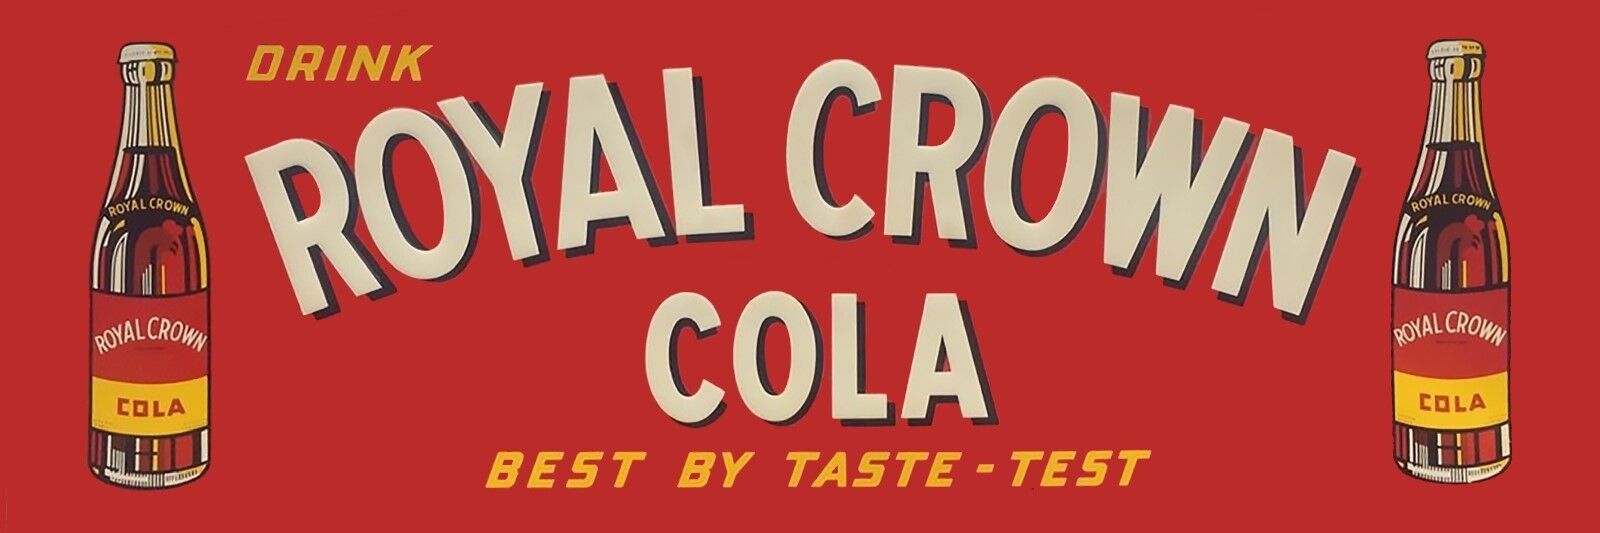 1951 Royal Crown Cola High Quality Metal Magnet 2 x 6 inches 9425